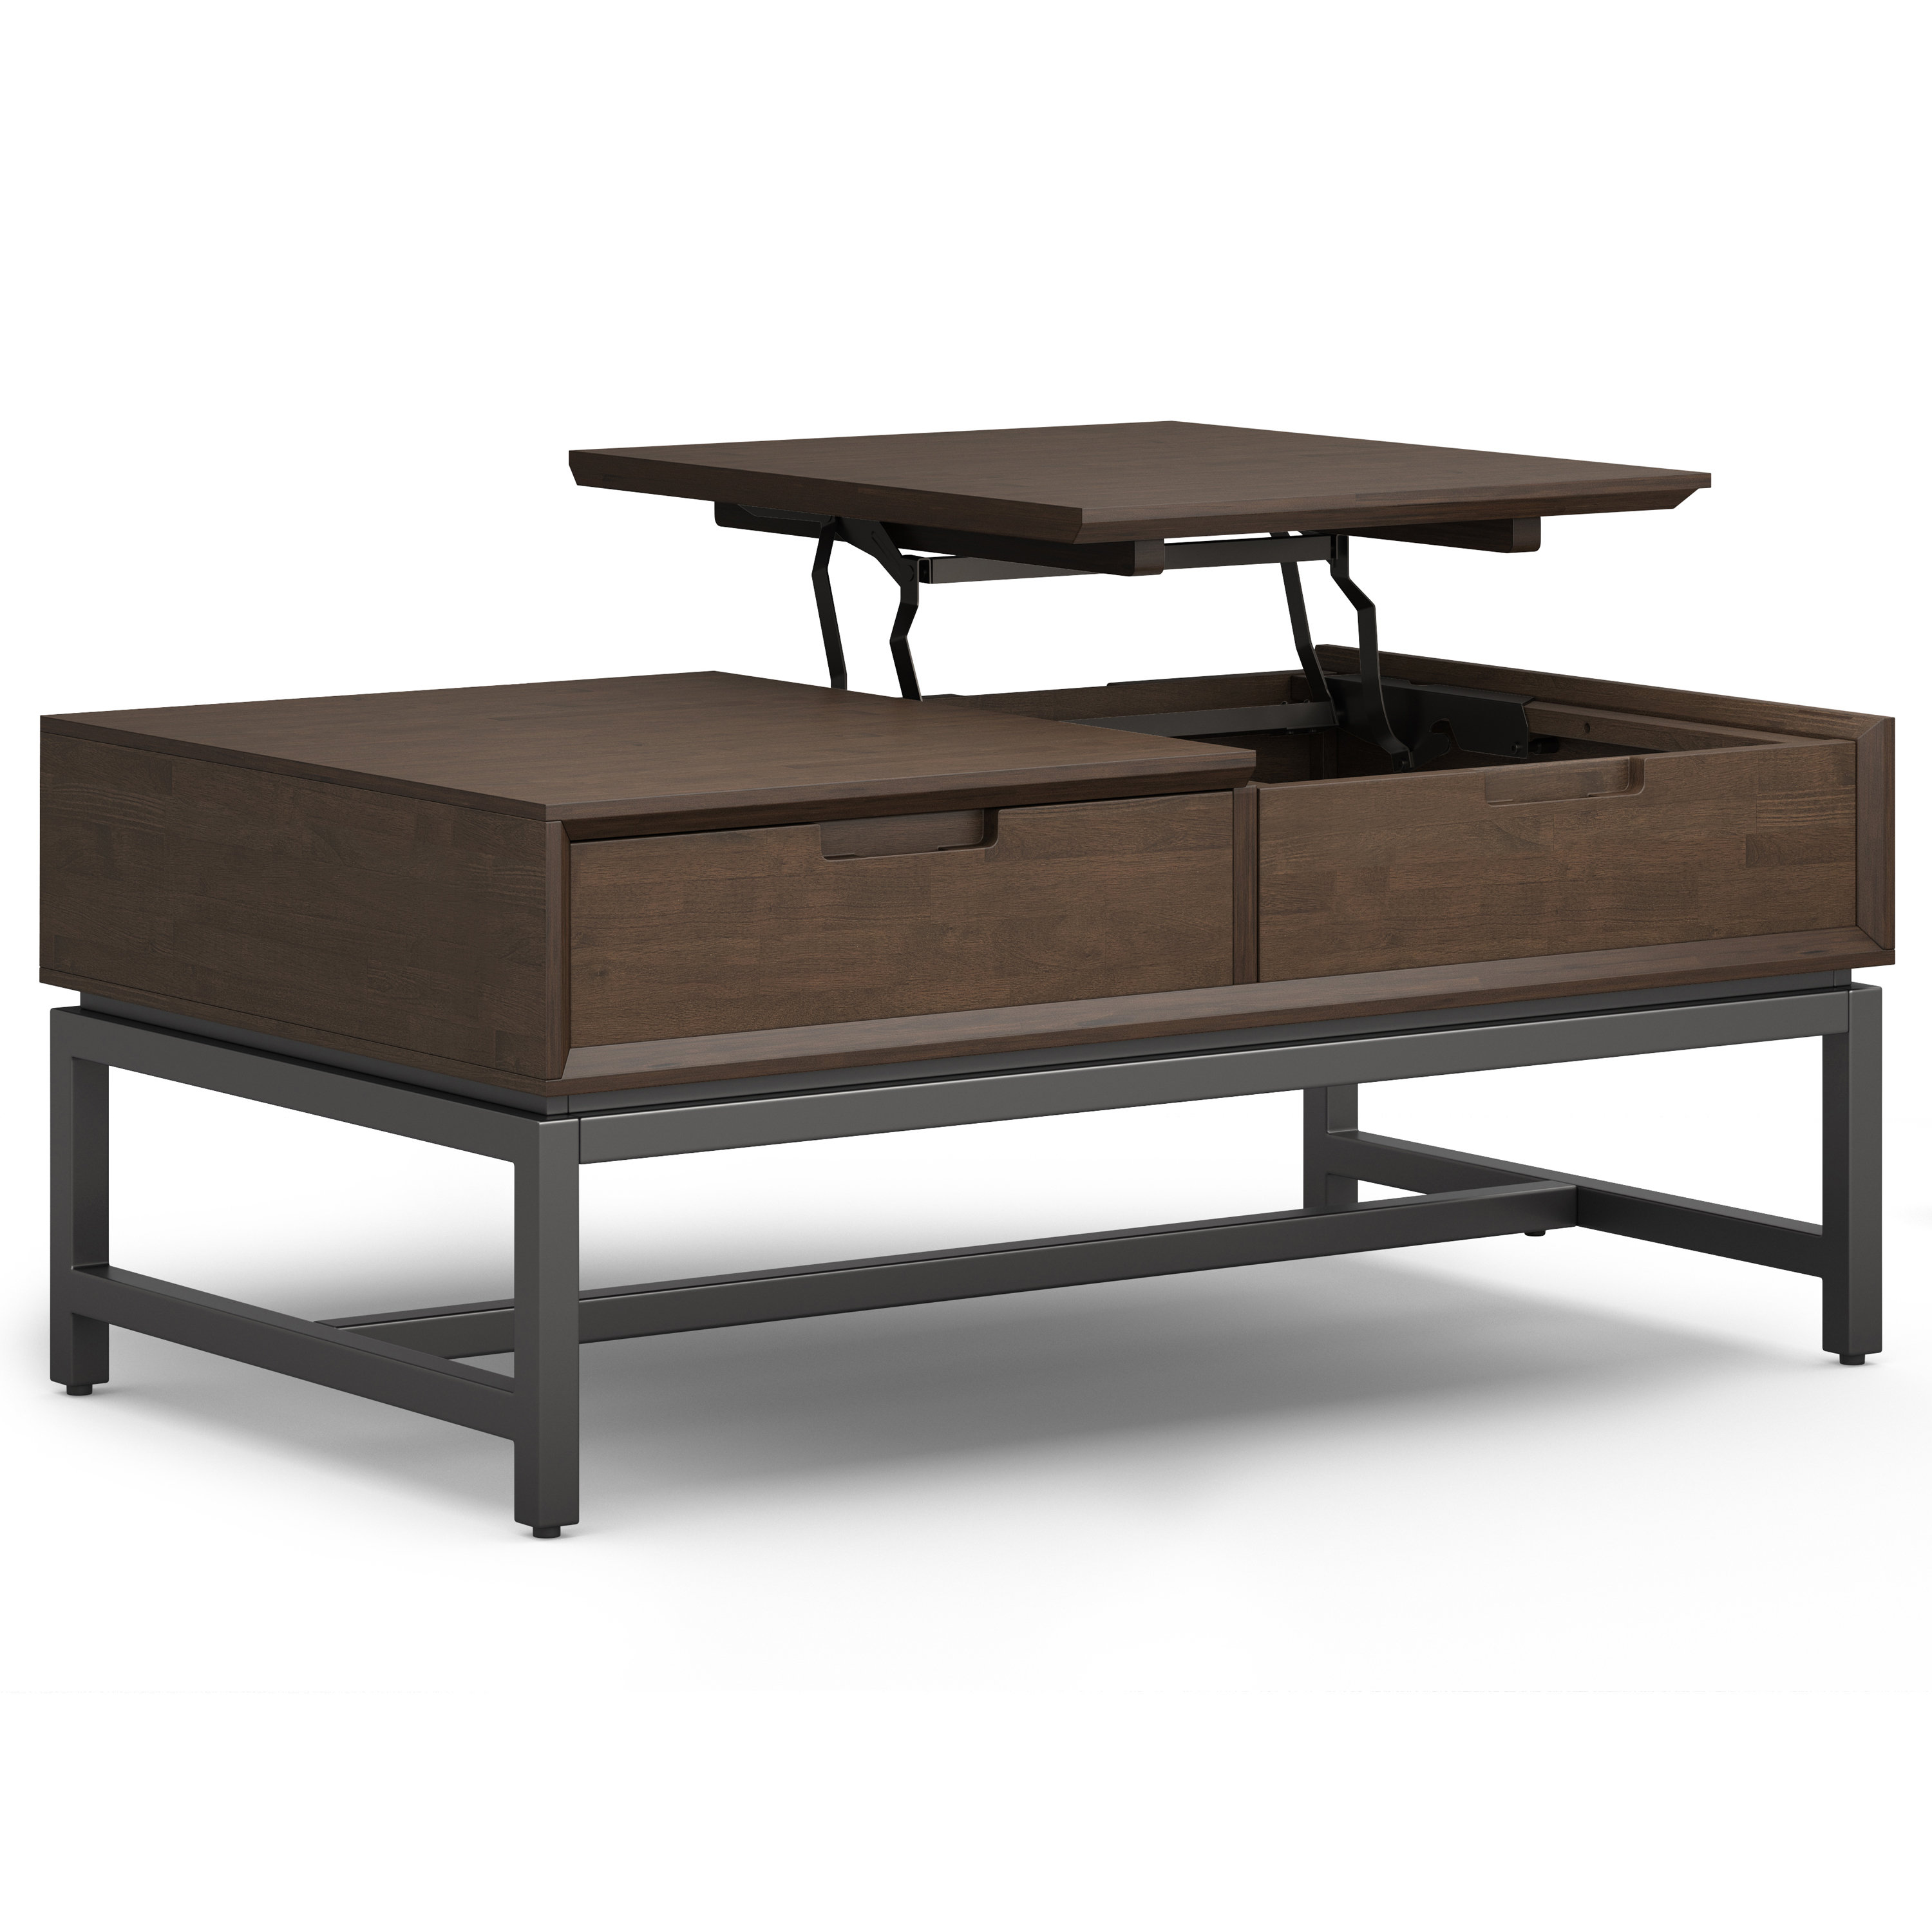 Sparta Black Lift Top Extendable Coffee Table with Storage Millwood Pines Color: Black